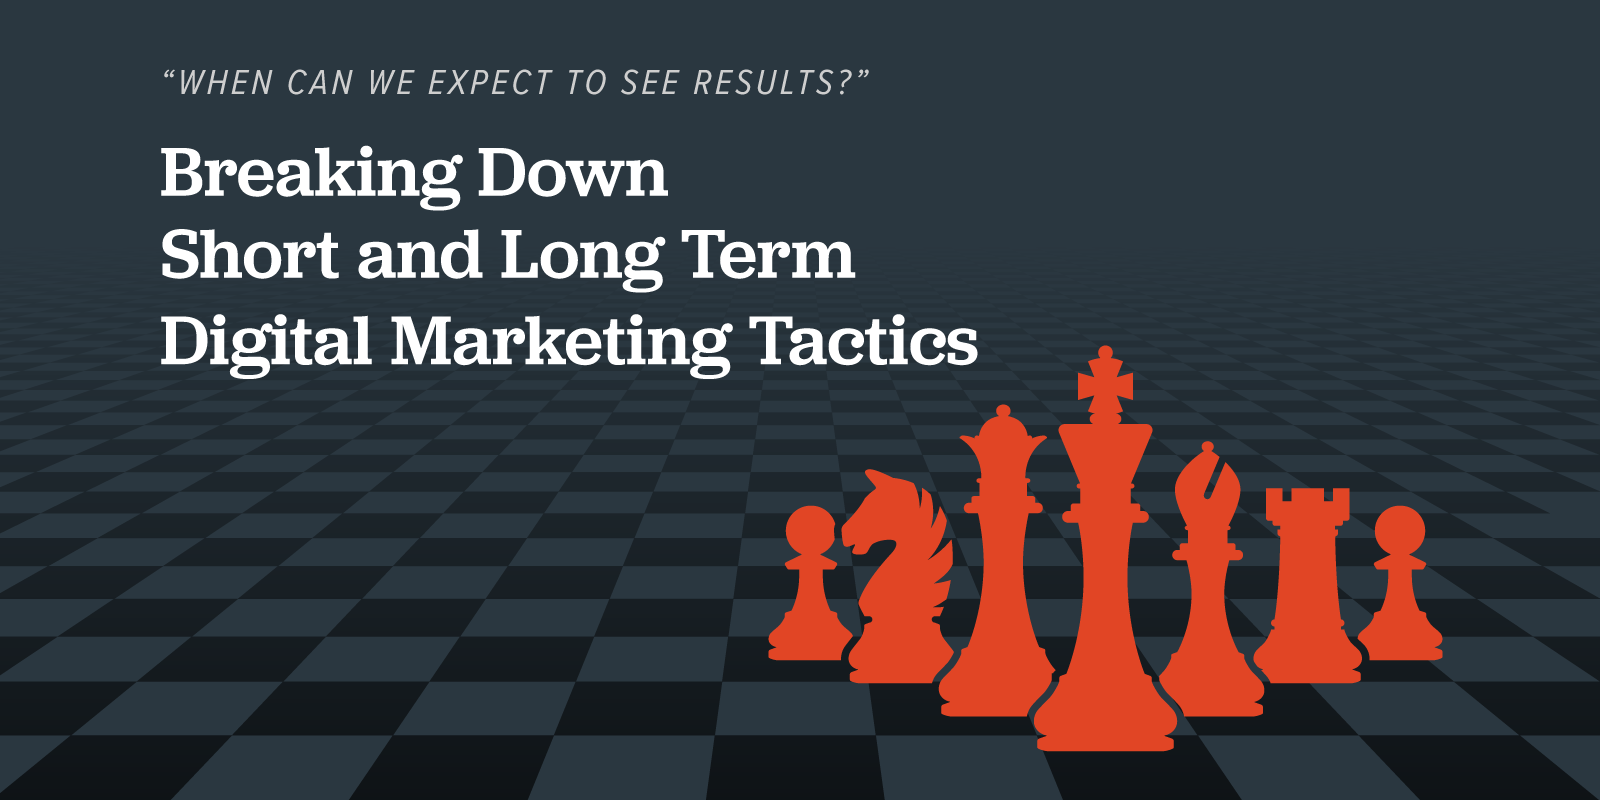 Breaking down short and long term digital marketing tactics featured image of chess